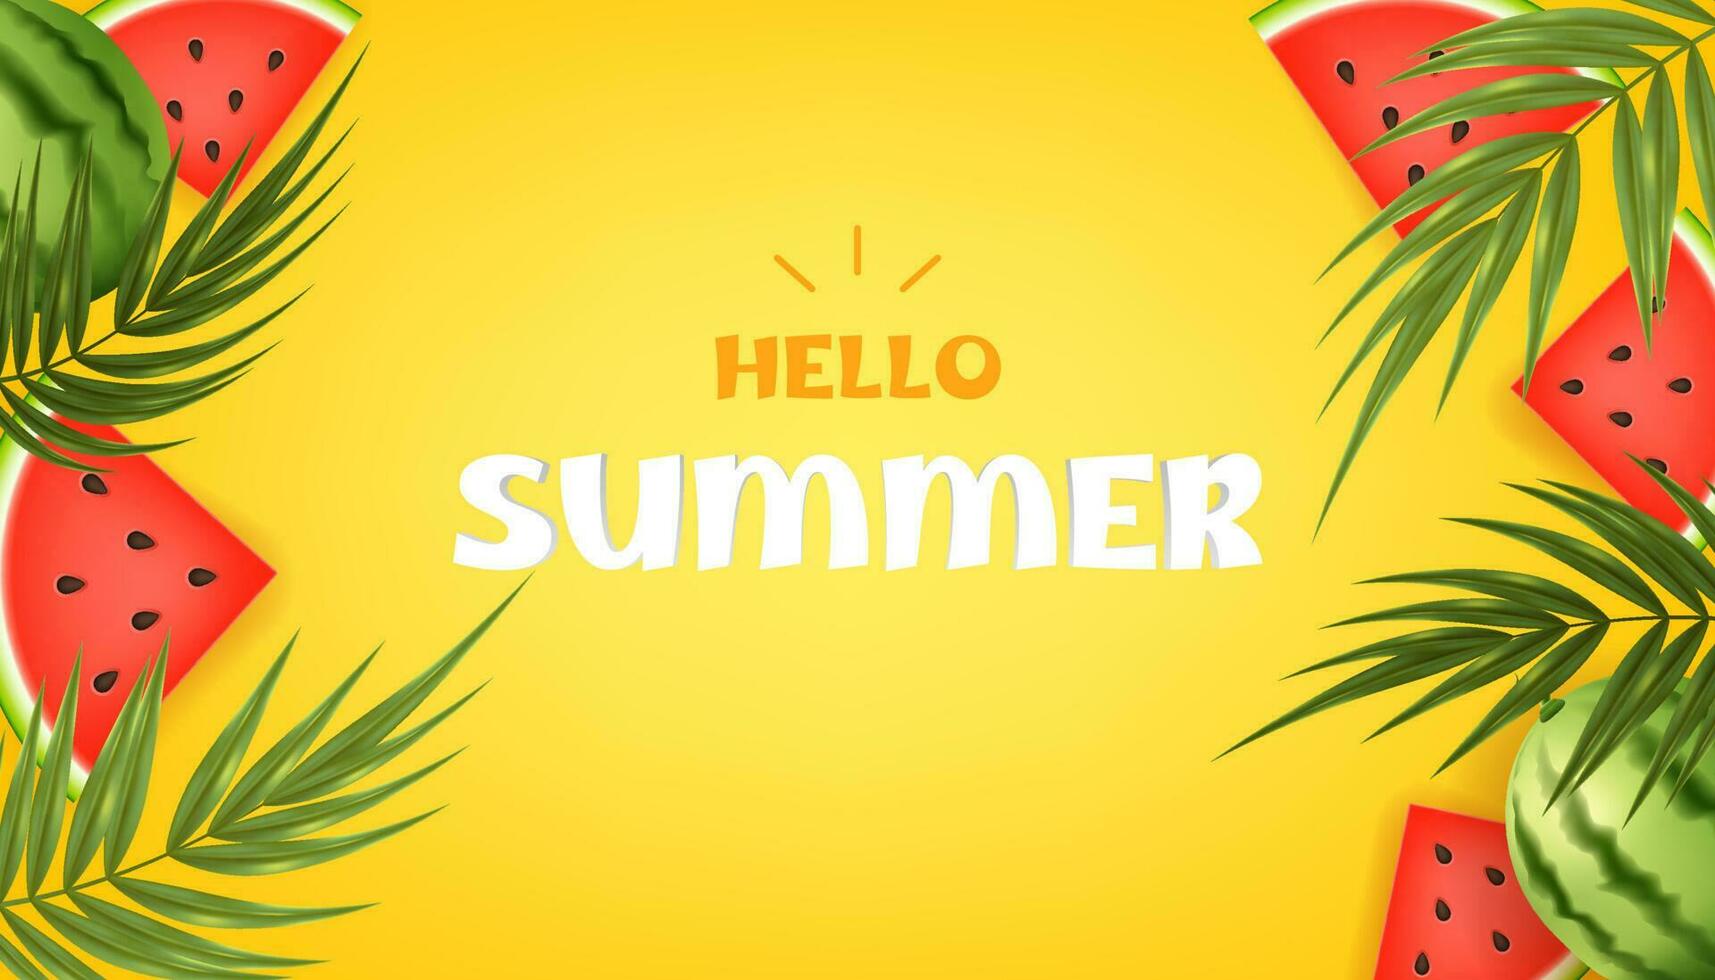 Hello summer with tropical vibes. Vector illustration of juicy watermelon, exotic leaves and palm trees on a yellow background, perfect for a summer sale banner, summer promotions, flyers, posters.